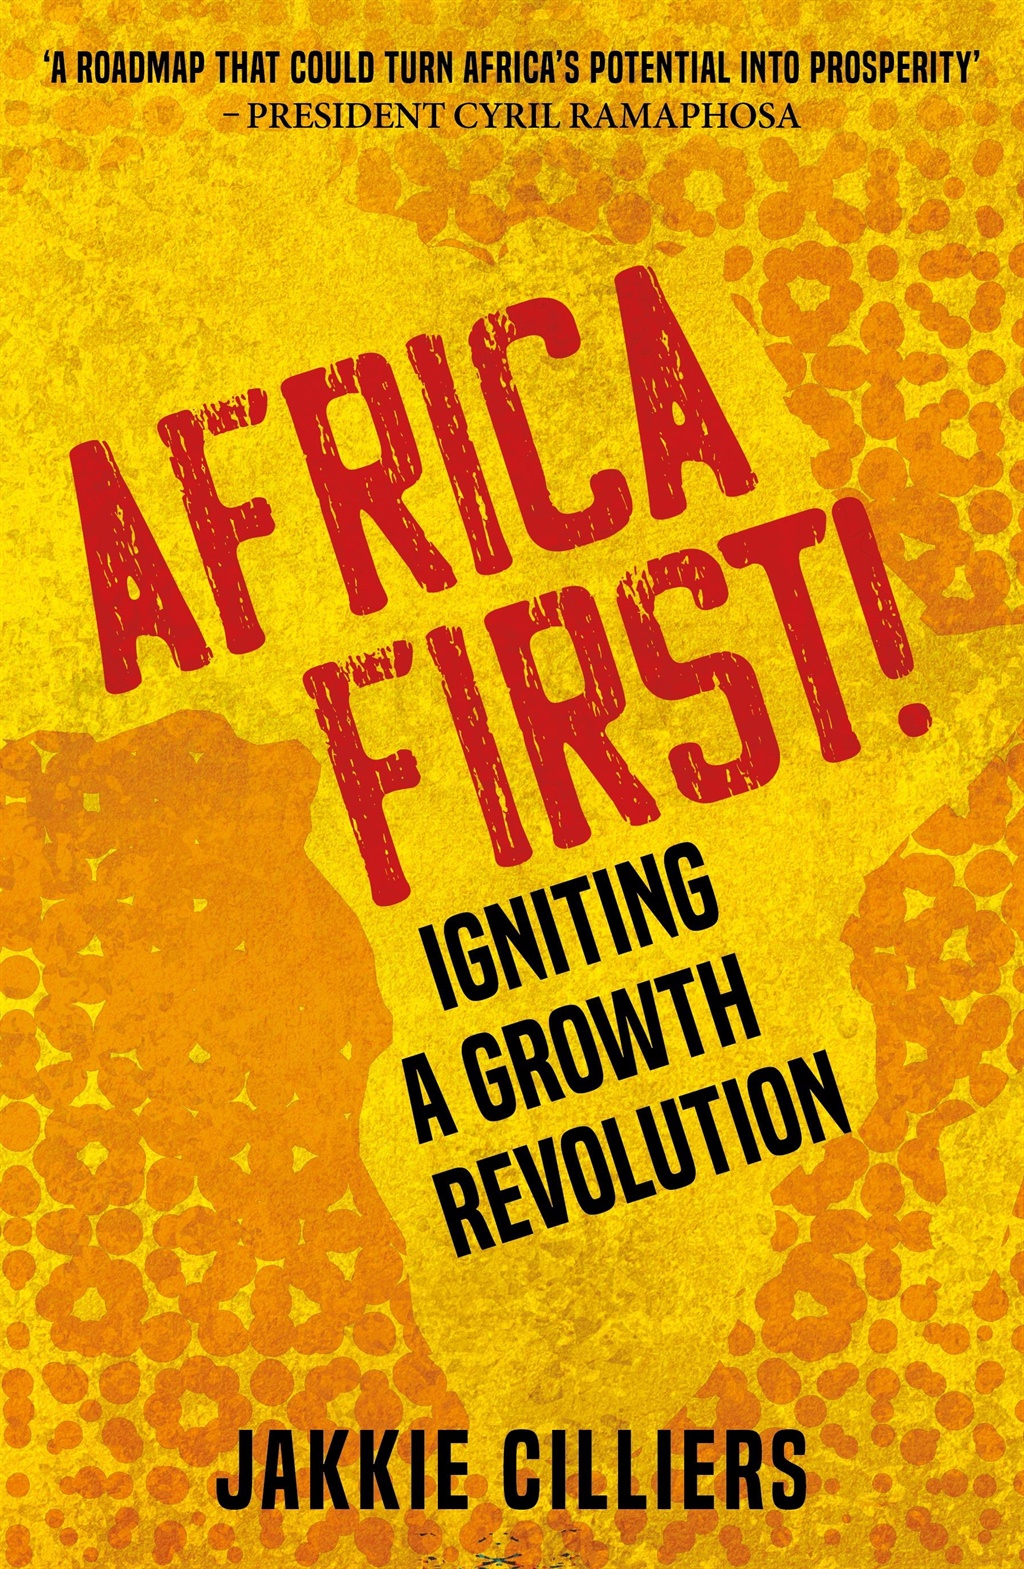 Africa First! by Jakkie Cilliers is published by Jonathan Ball Publishers.